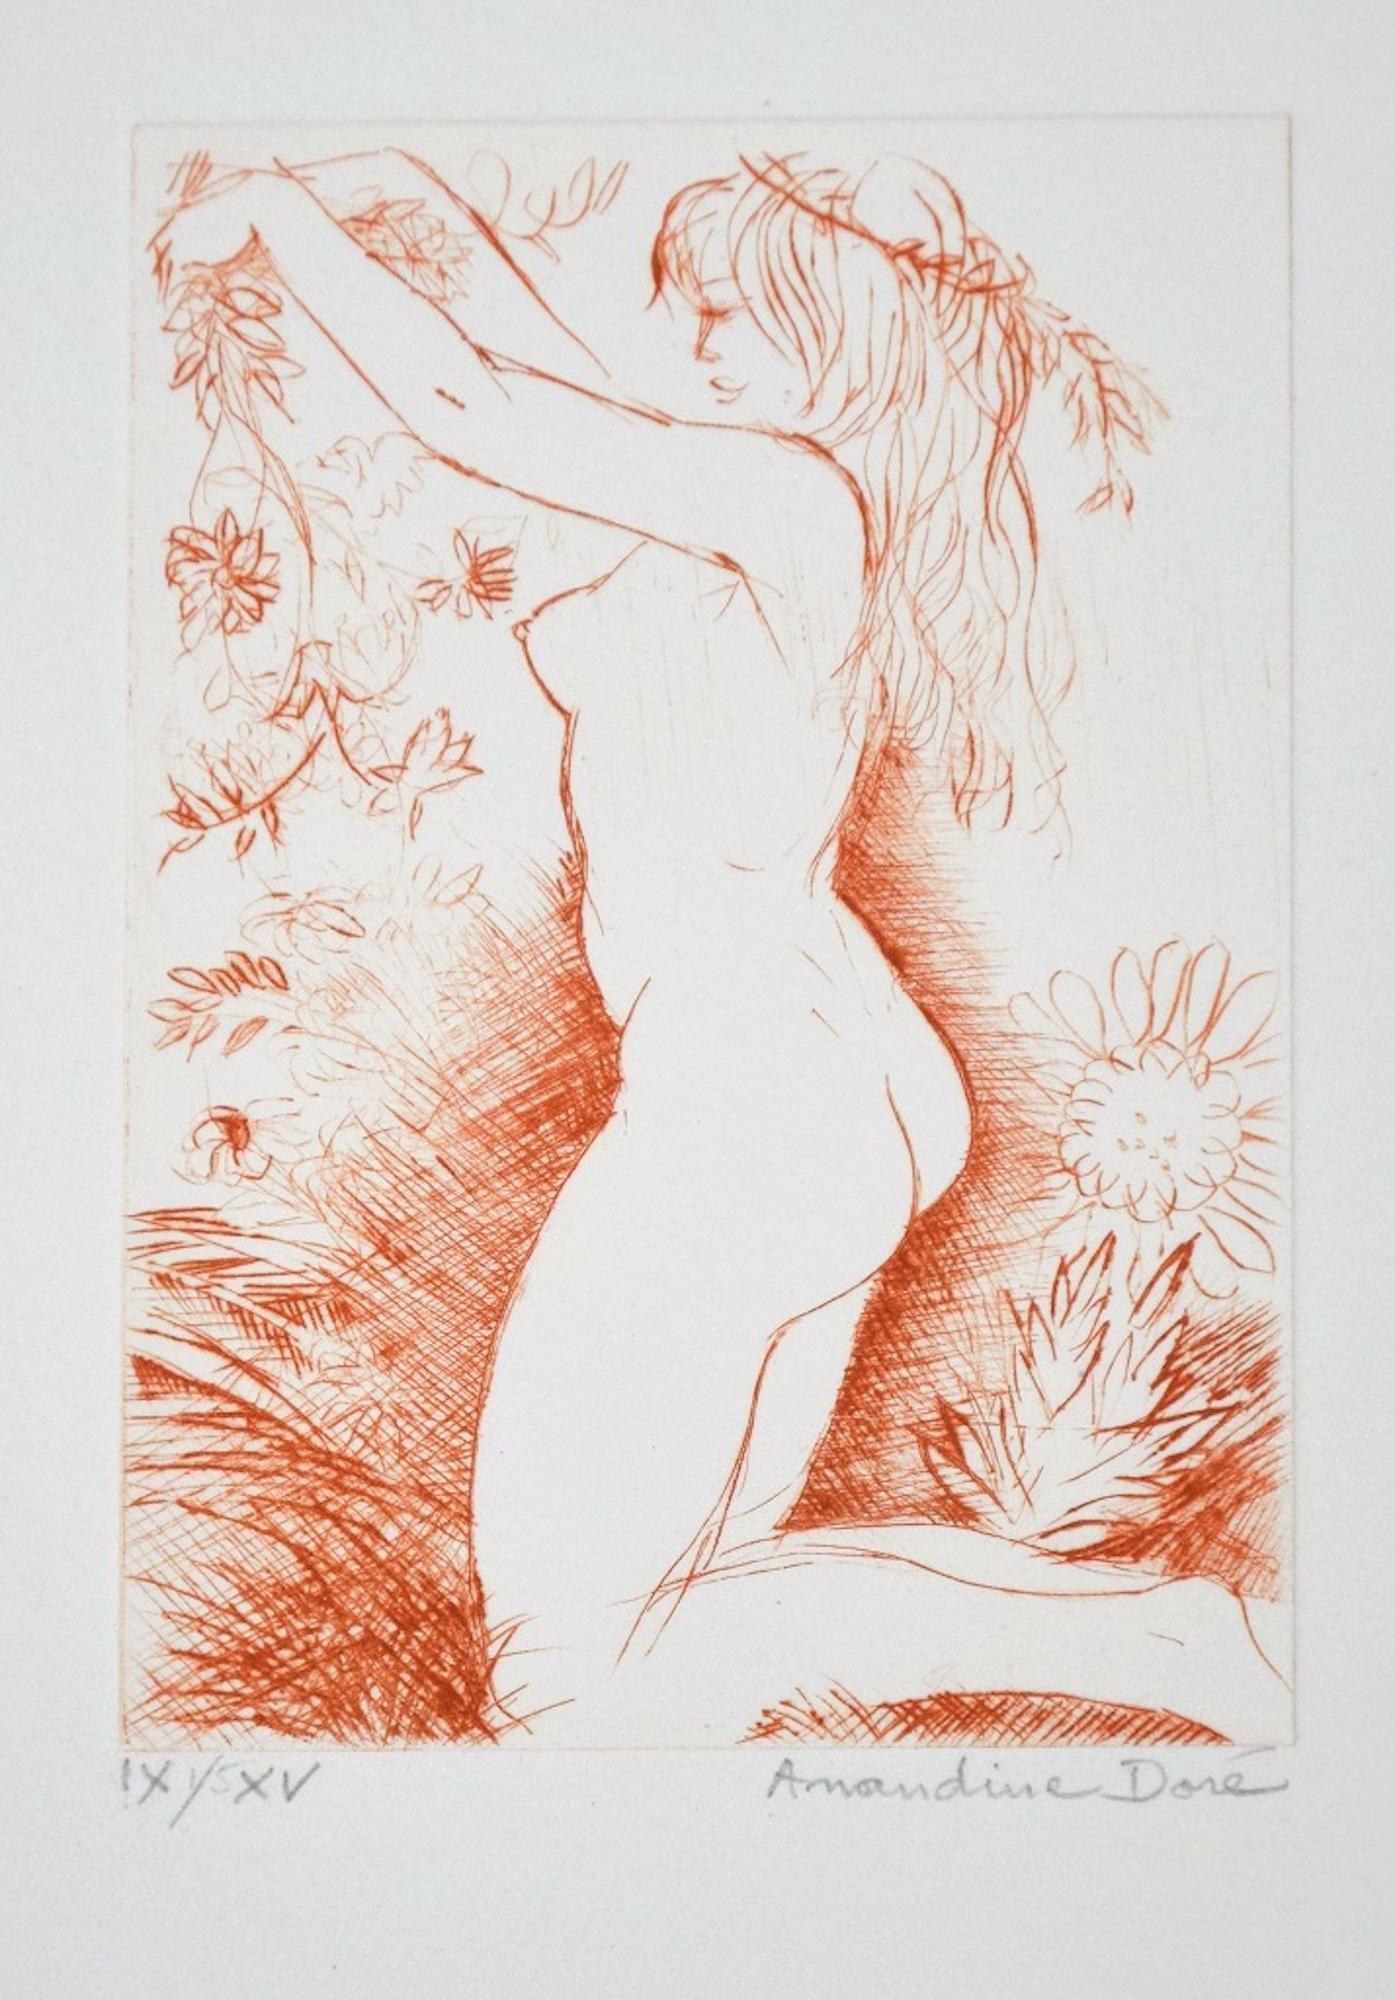 Nude Woman with Flowers - Original Etching ad Drypoint by A. Doré - 1950s - Print by Amandine Doré